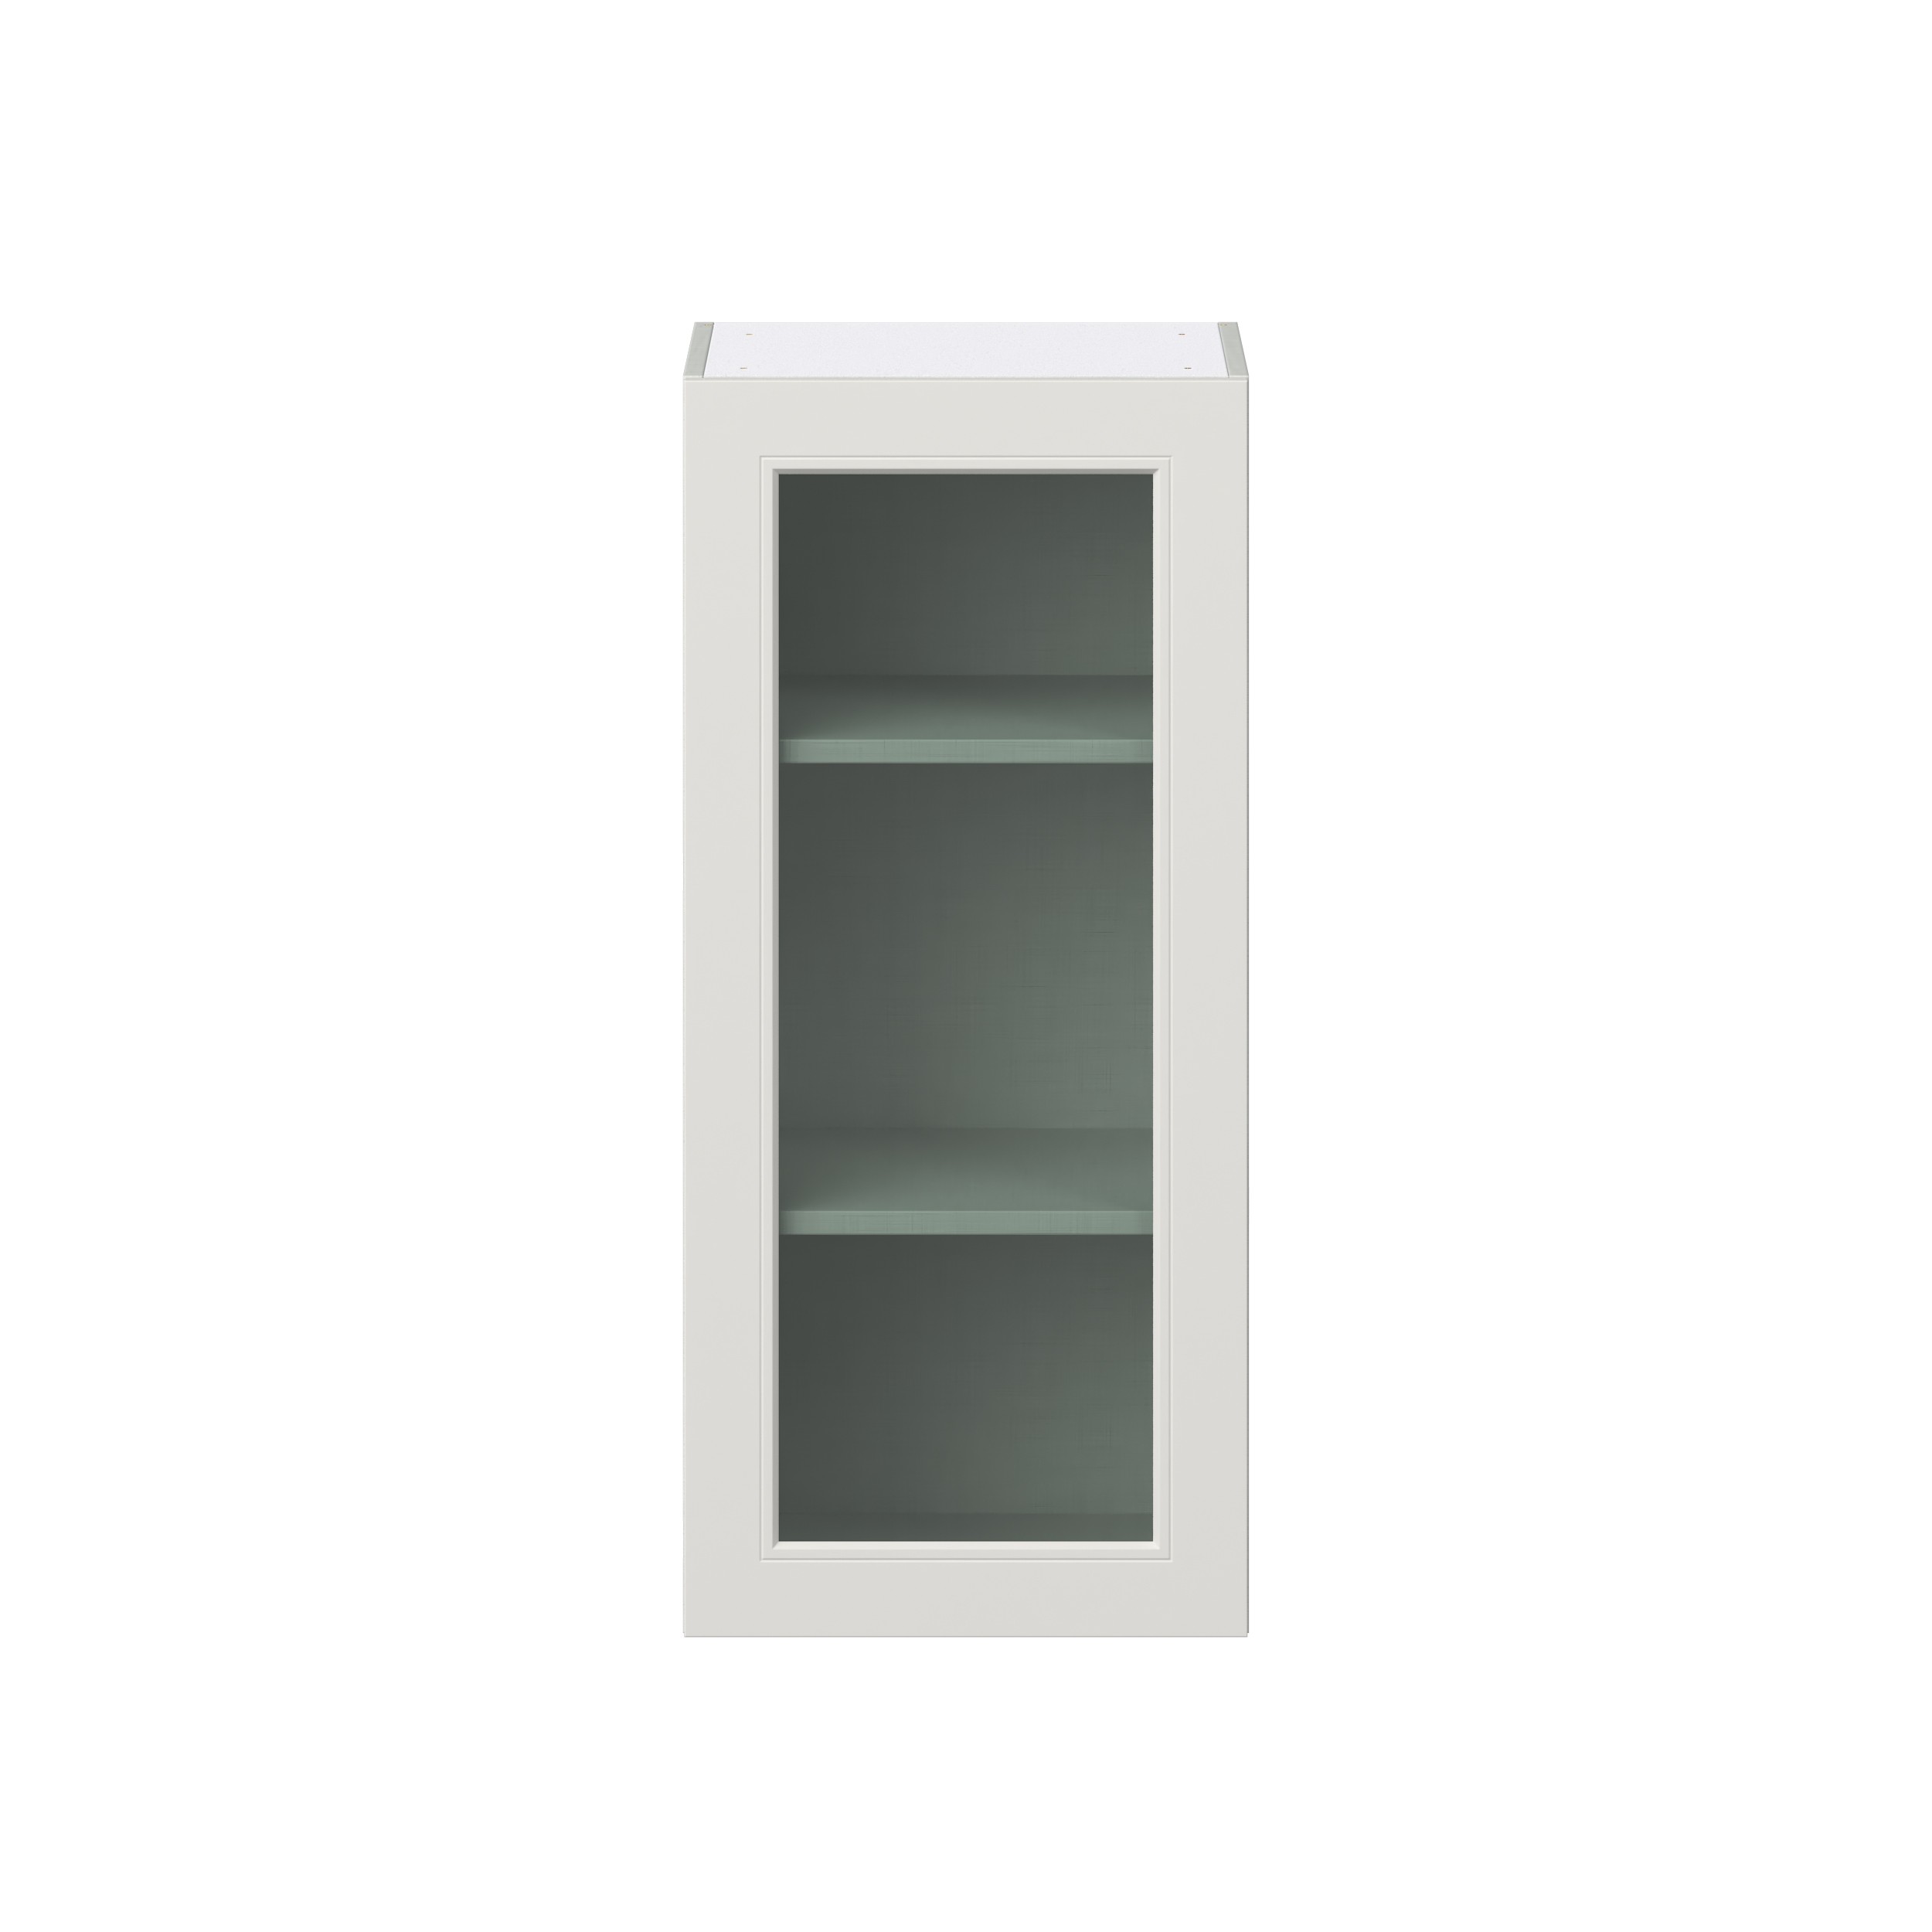 Wisteria Painted Light Gray Recessed Assembled Wall Cabinet with a Full High Glass Door (18 in. W x 40 in. H x 14 in. D)